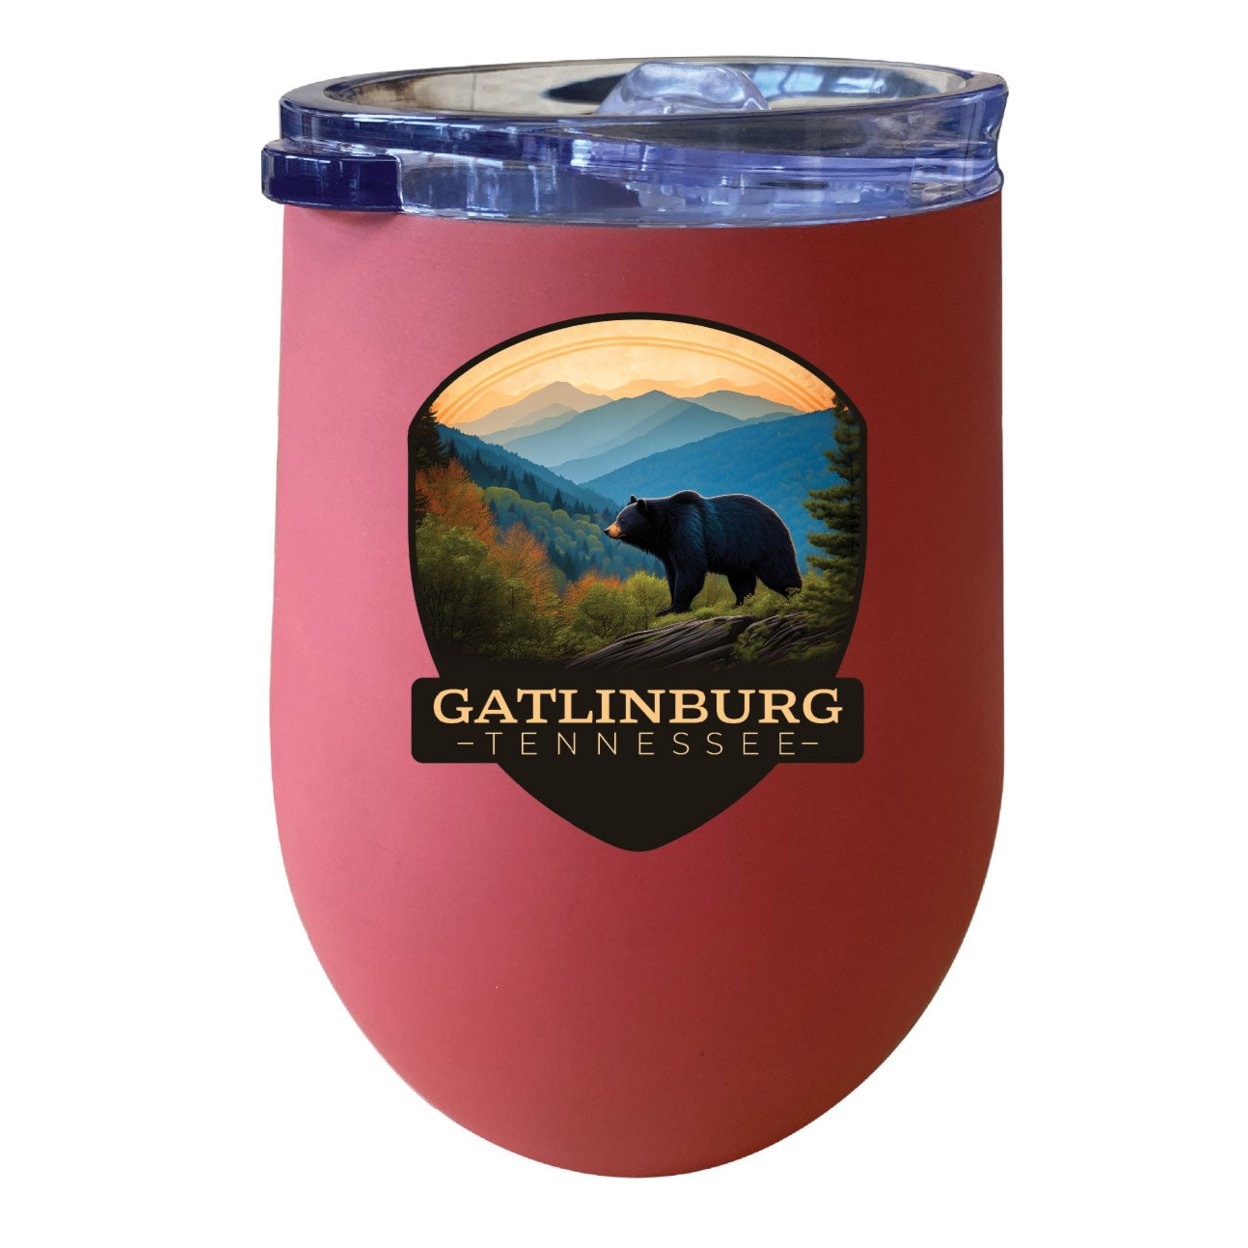 Gatlinburg Tennessee Souvenir 12 Oz Insulated Wine Stainless Steel Tumbler - Coral, A